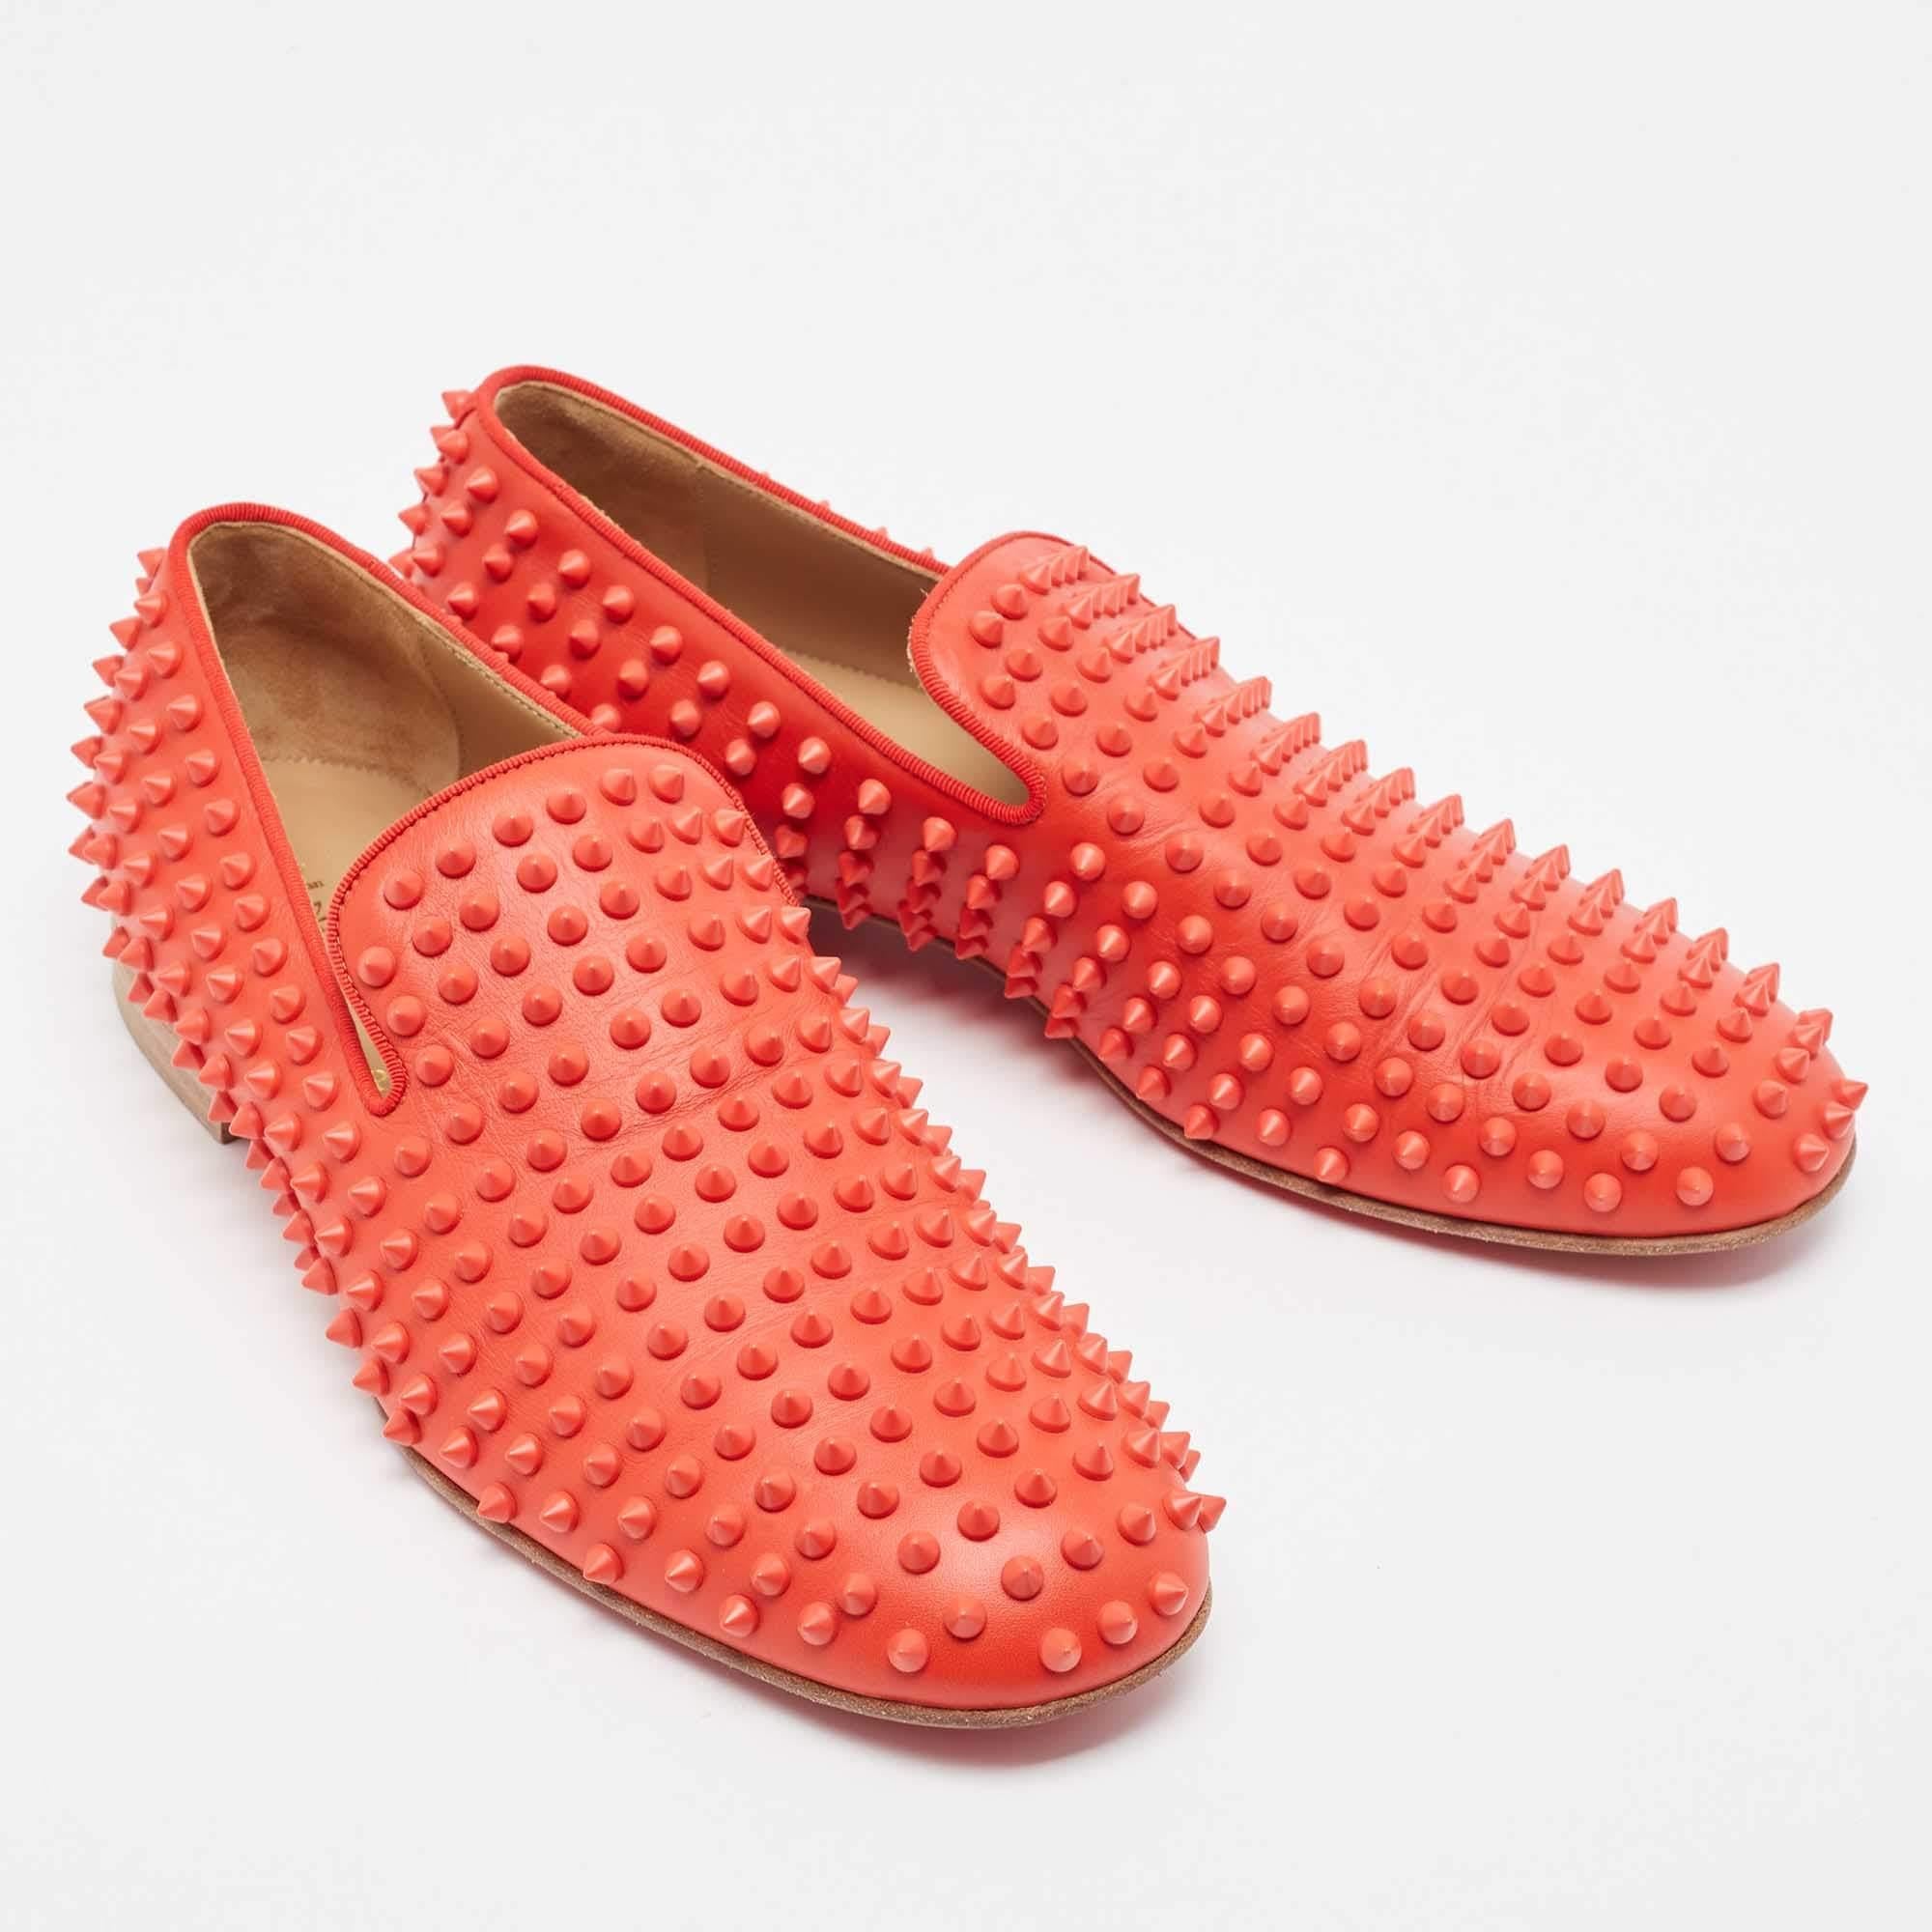 Orange Christian Louboutin Red Leather Rollerboy Spikes Smoking Slippers Size 42